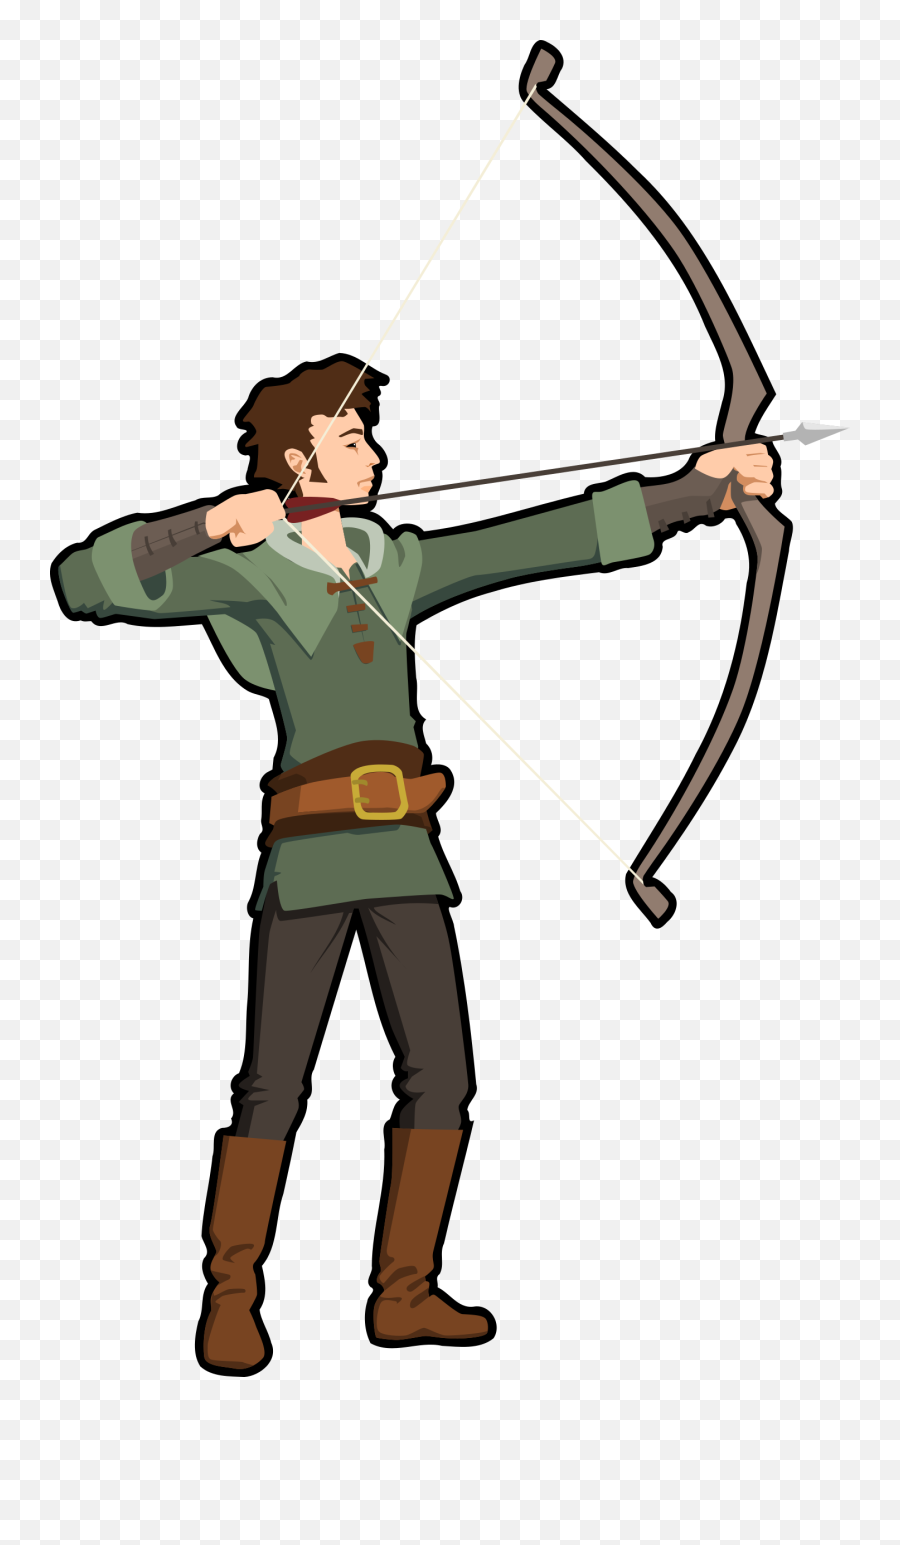 Archery Free To Use Clipart 2 - Clipartix Hunter With Bow And Arrow Clipart Emoji,Bow And Arrow Emoji